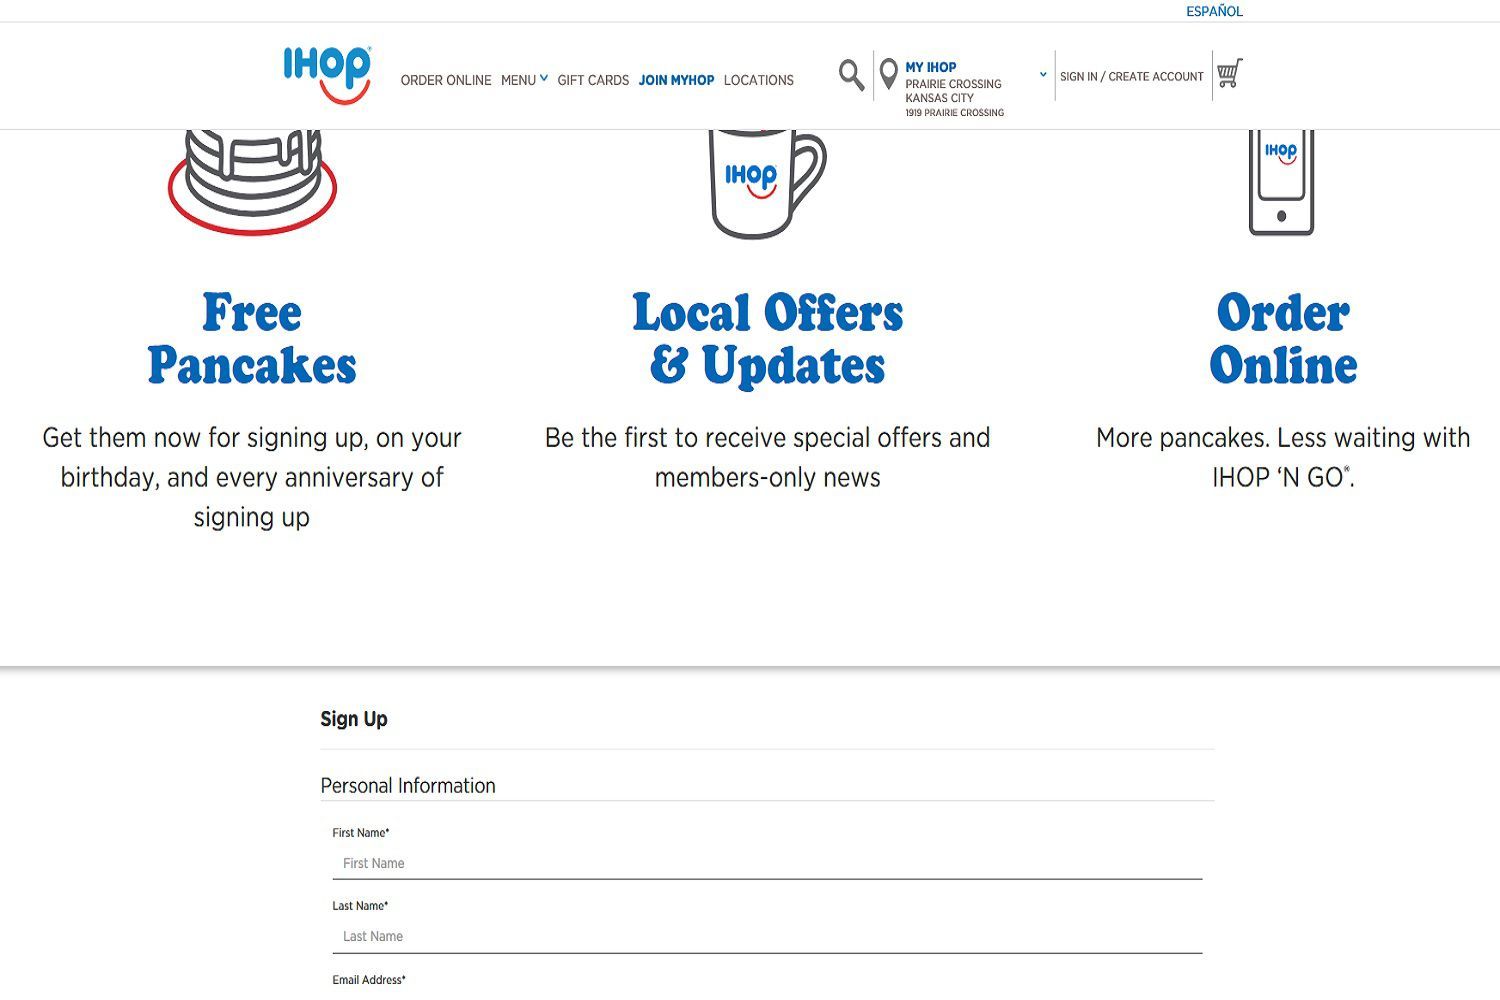 Скриншот IHOP's MyHop sign-up webpage. Customers who sign up for MyHop can get free pancakes just for signing up.